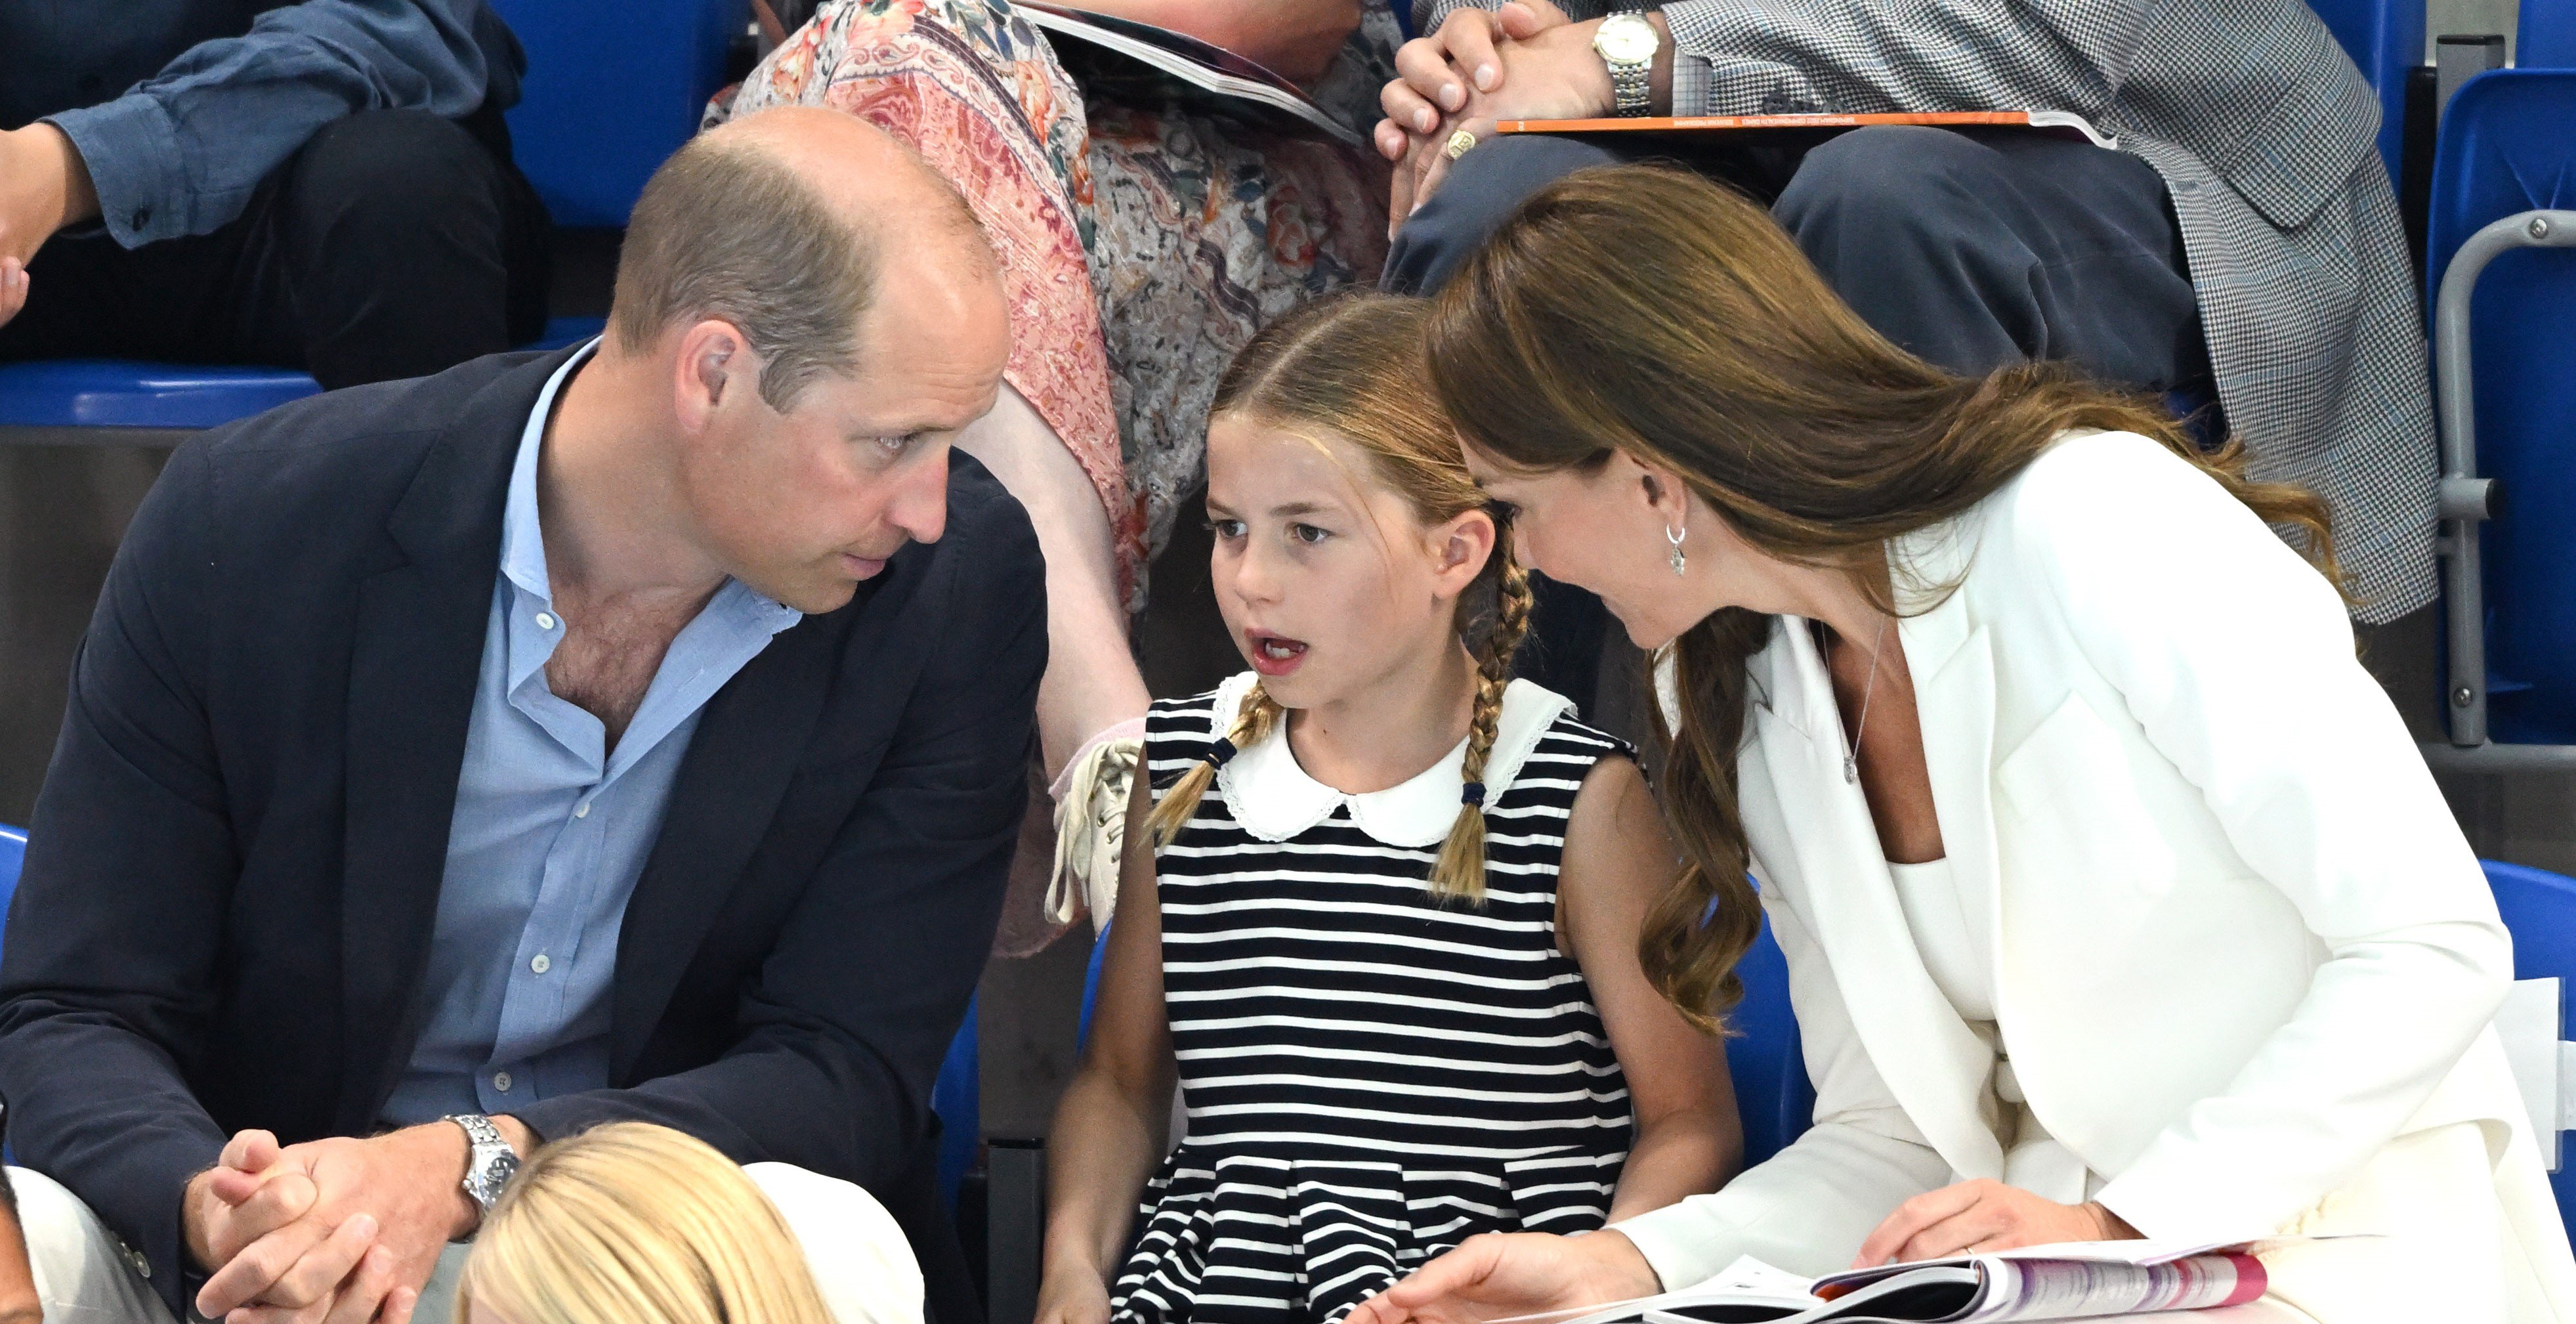 Prince William, Kate Middleton, and Princess Charlotte. who has 6-word question during the Commonwealth Games. attend the Sandwell Aquatics Centre